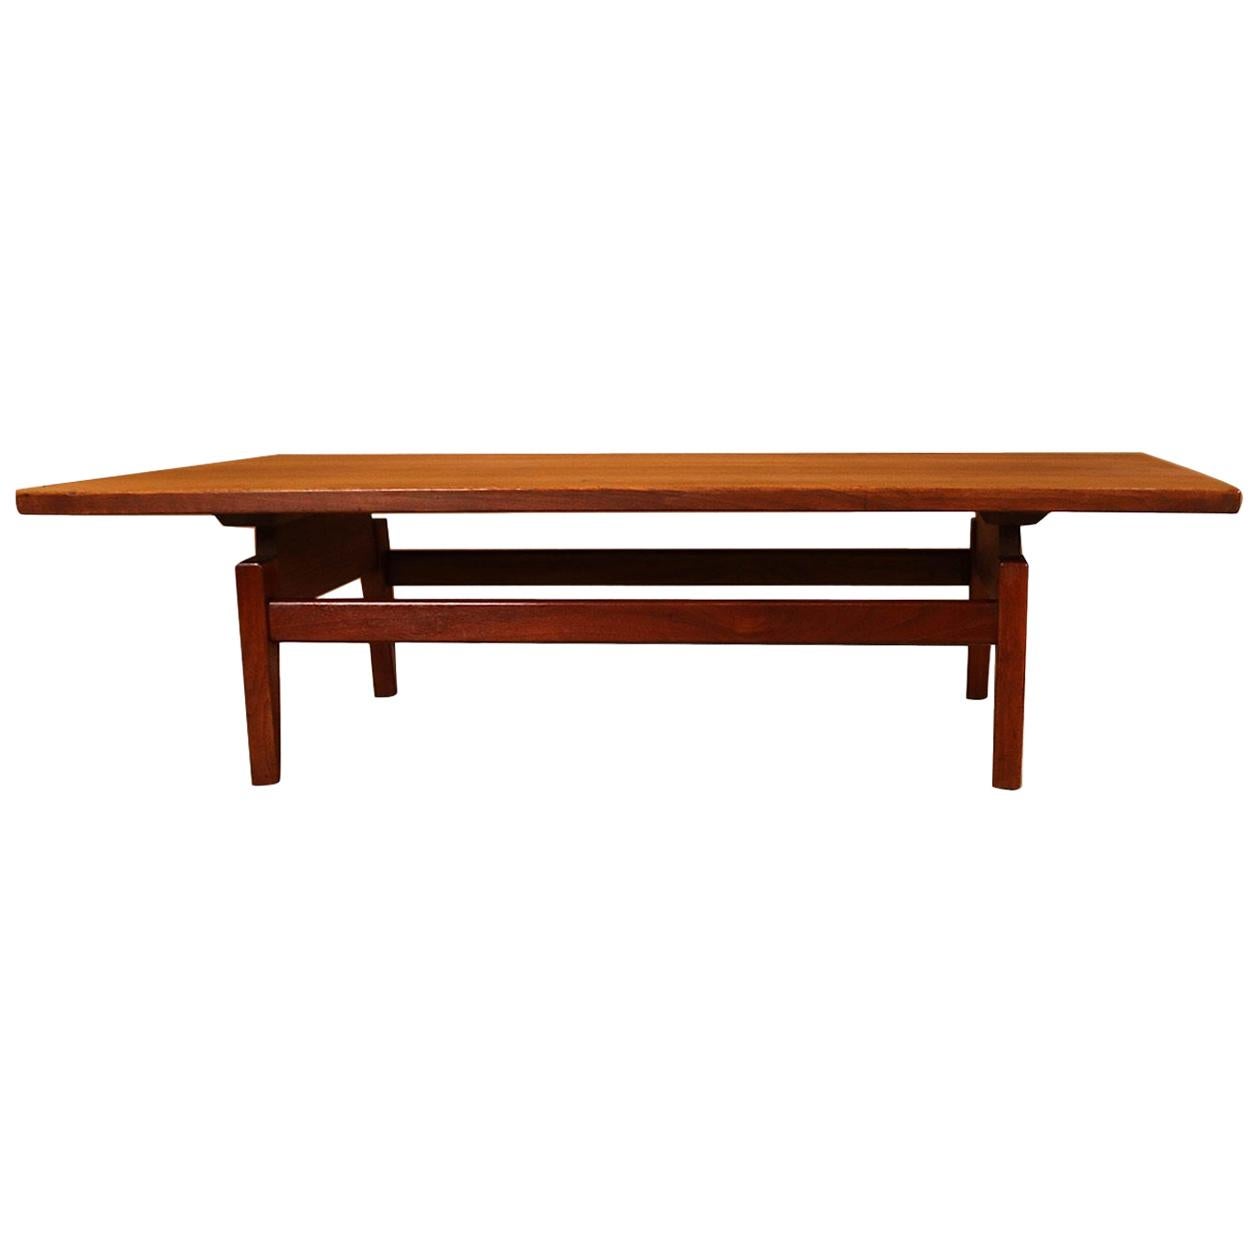 Midcentury Jens Risom Floating Top Coffee Table Bench